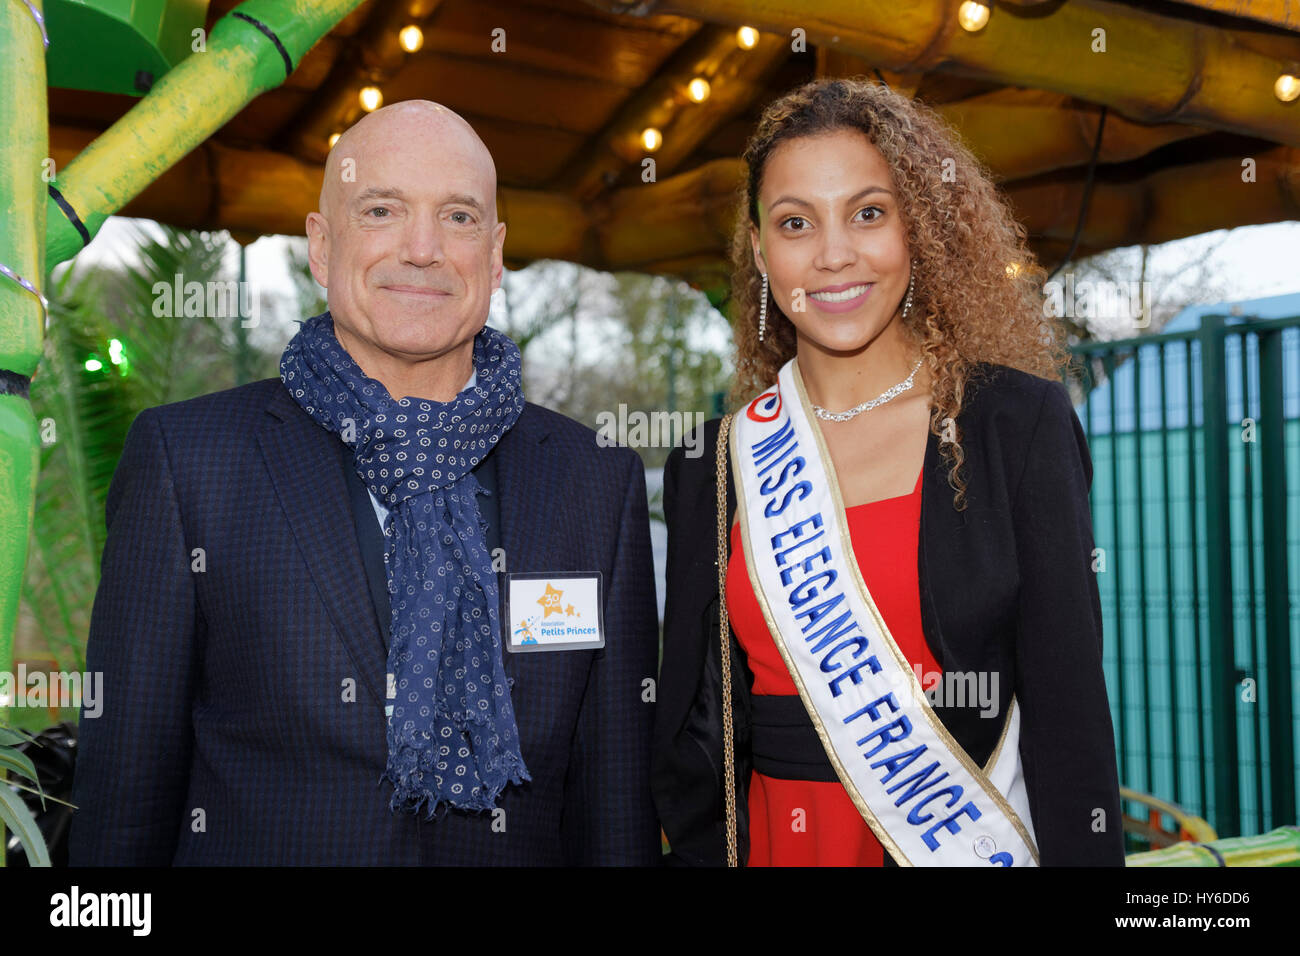 Paris, France. 31th March, 2017.Louis Bodin and Livia Hoarau attend at Opening evening of the Throne Fair for the benefit of Petits Princes Stock Photo